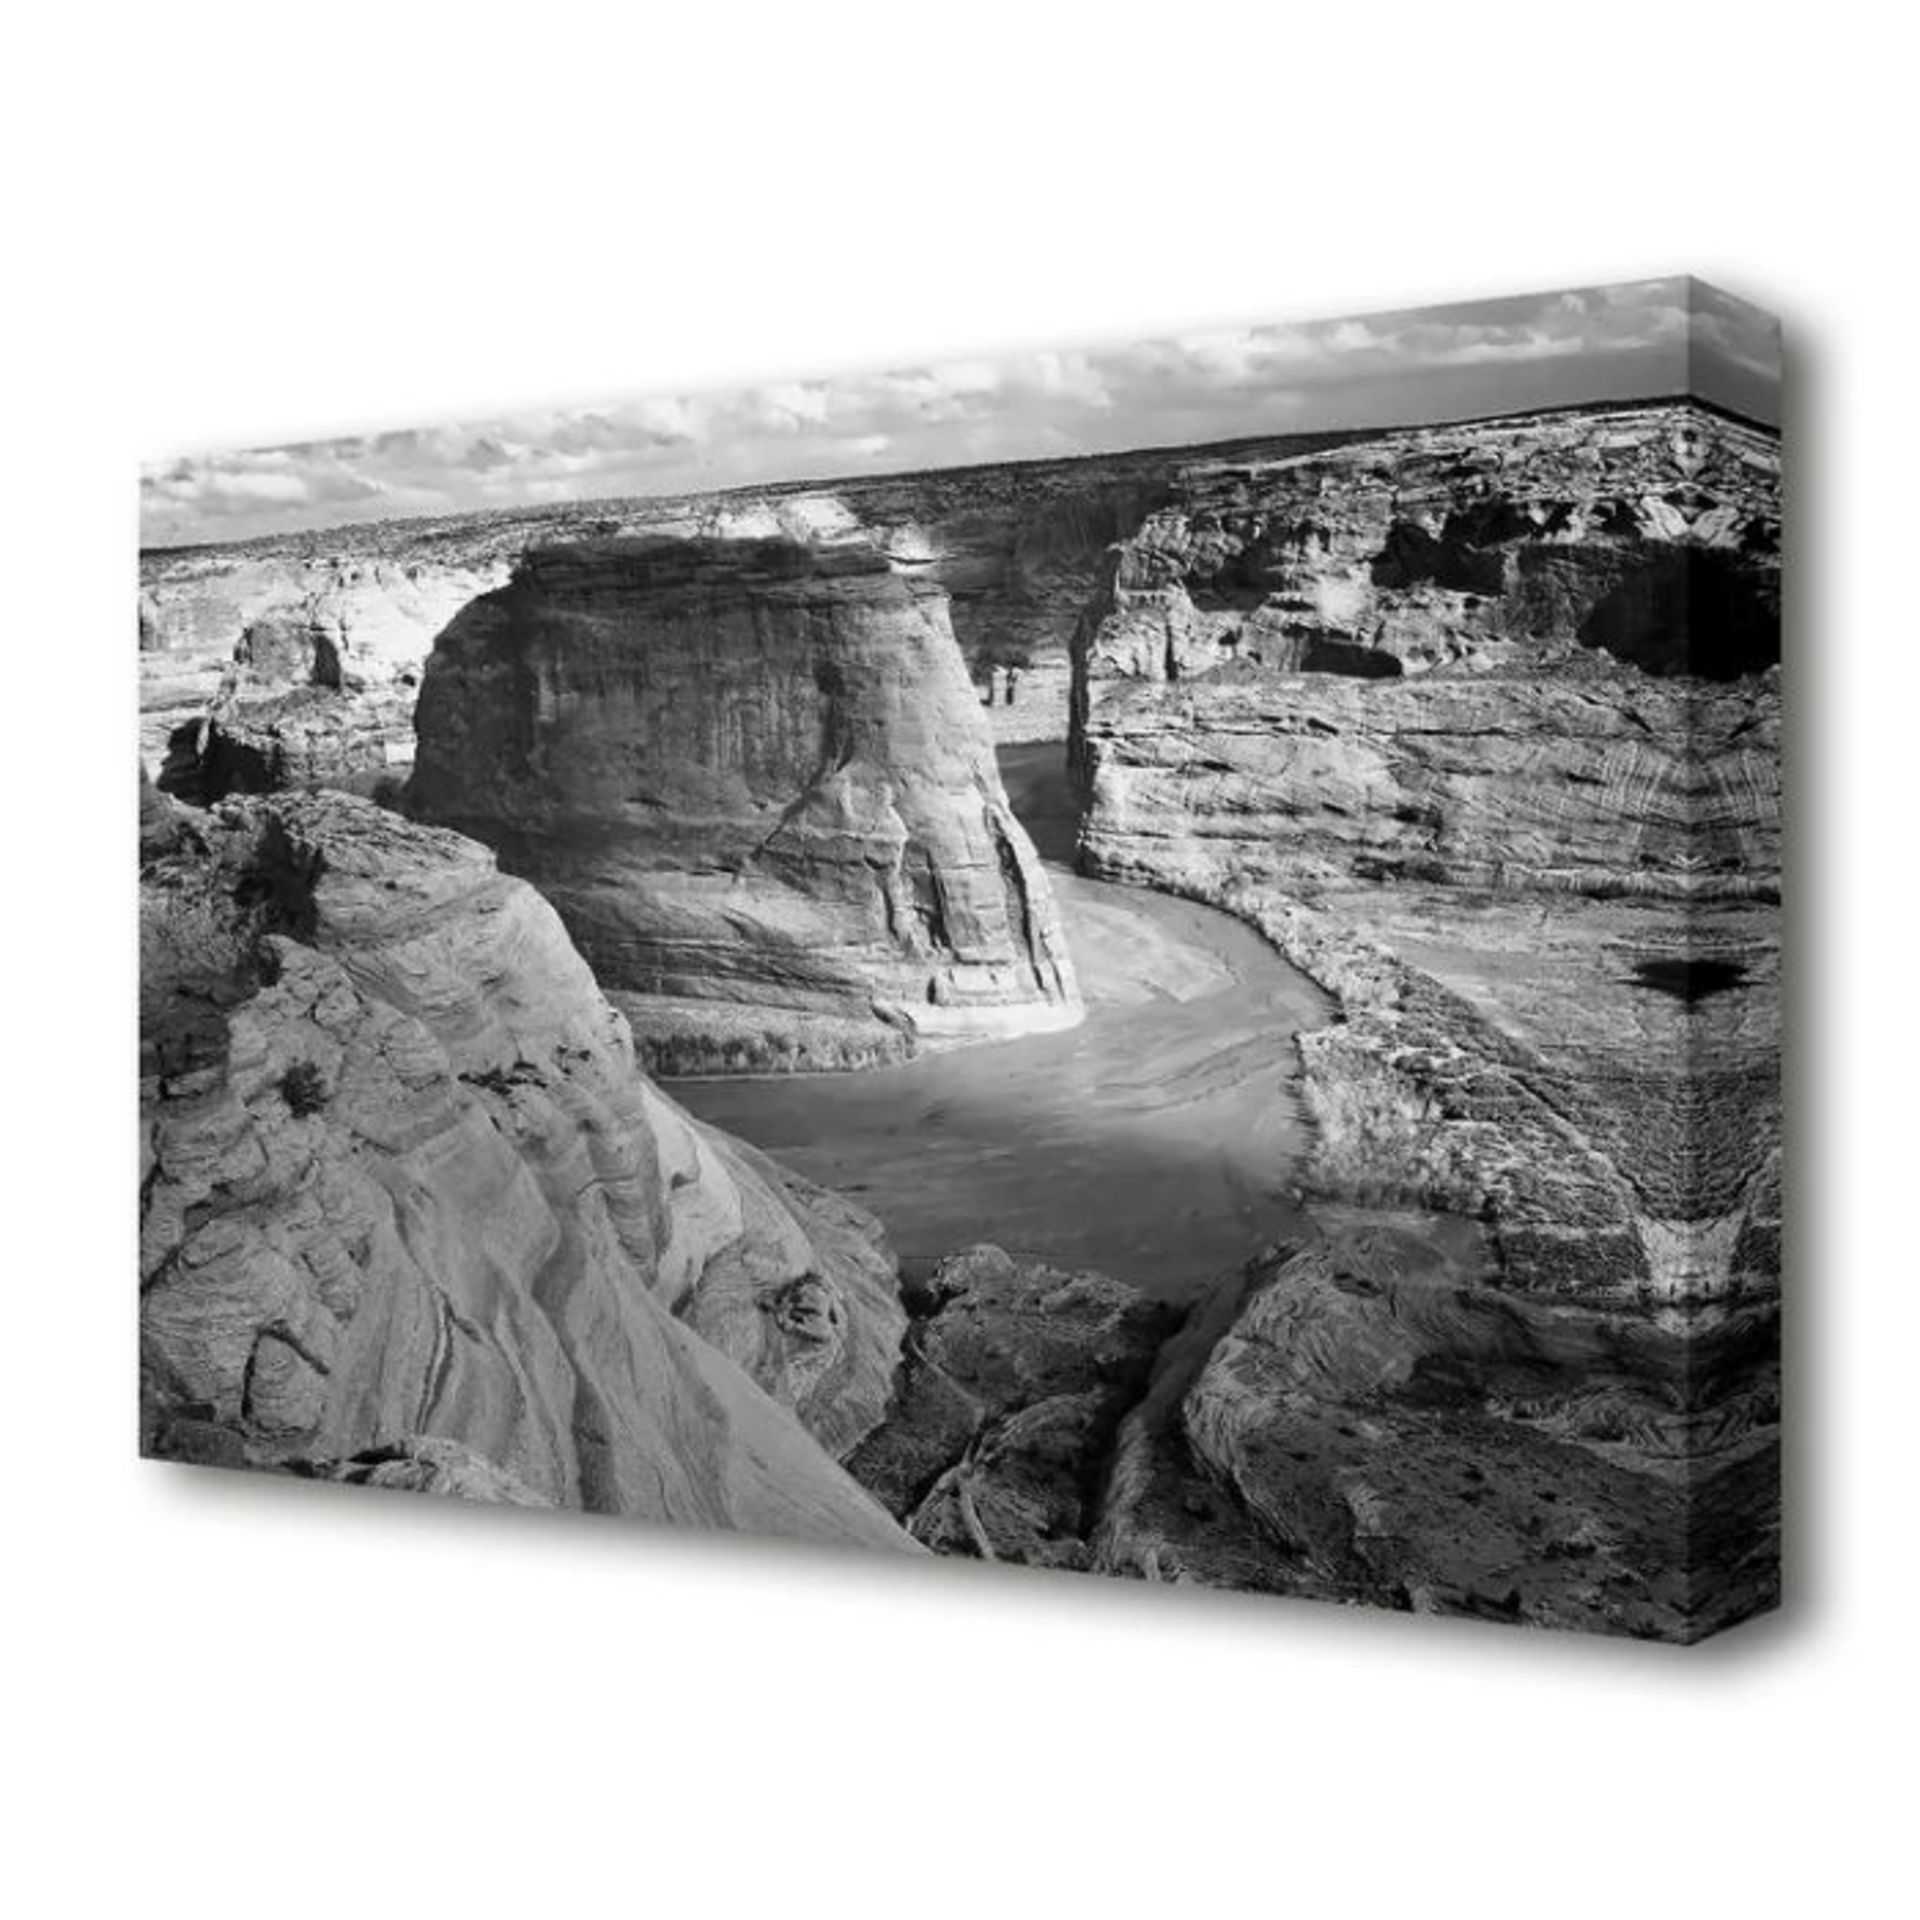 Canyon De Chelly Arizona Black and White' by Ansel